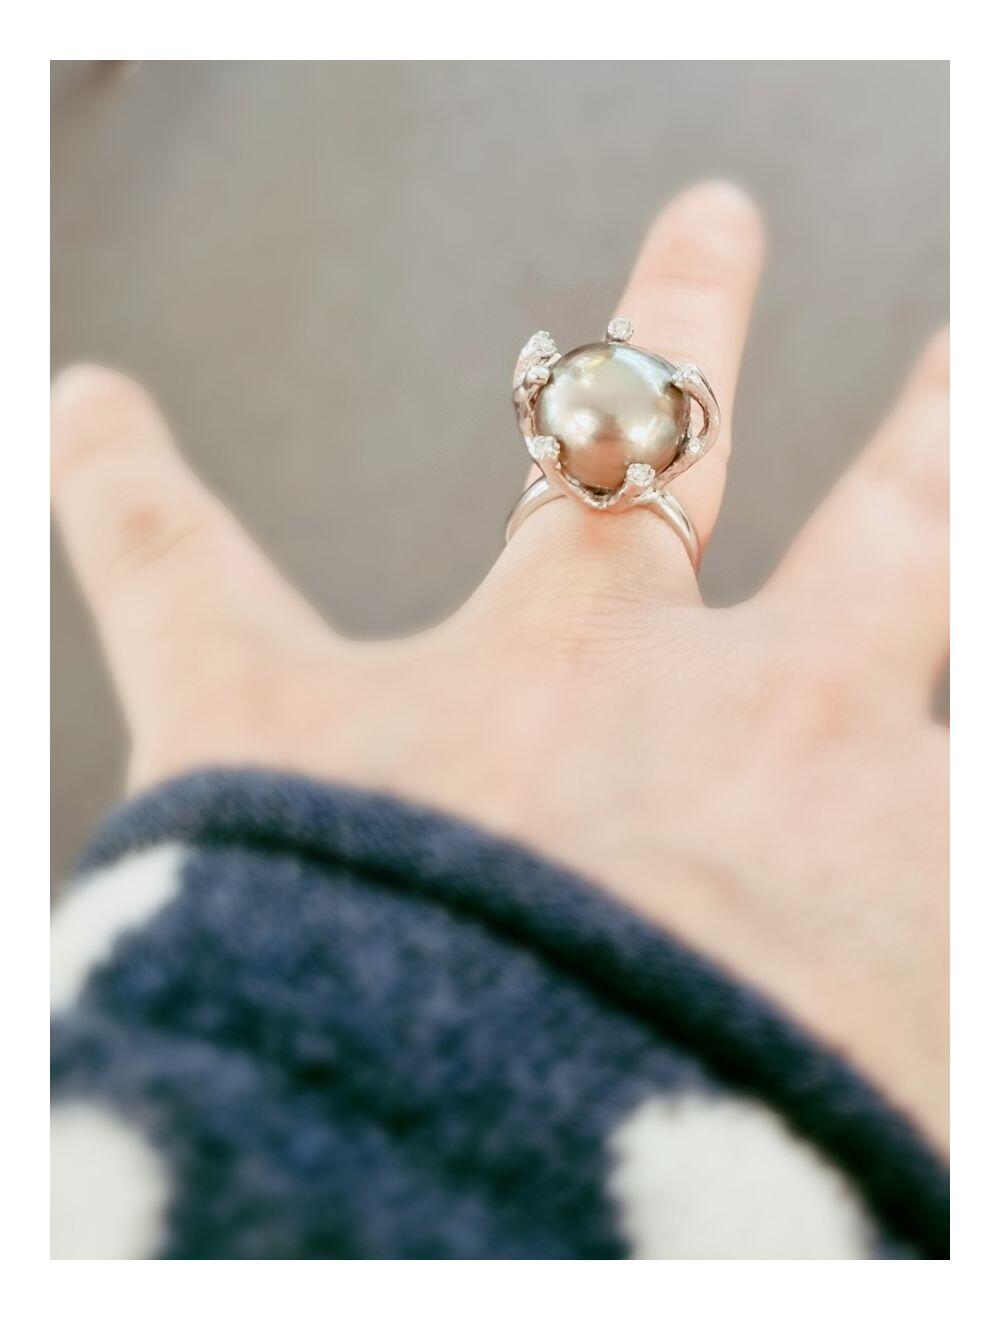 14ct white gold ring with a 13mm Tahitian pearl and 0.07ct natural diamonds